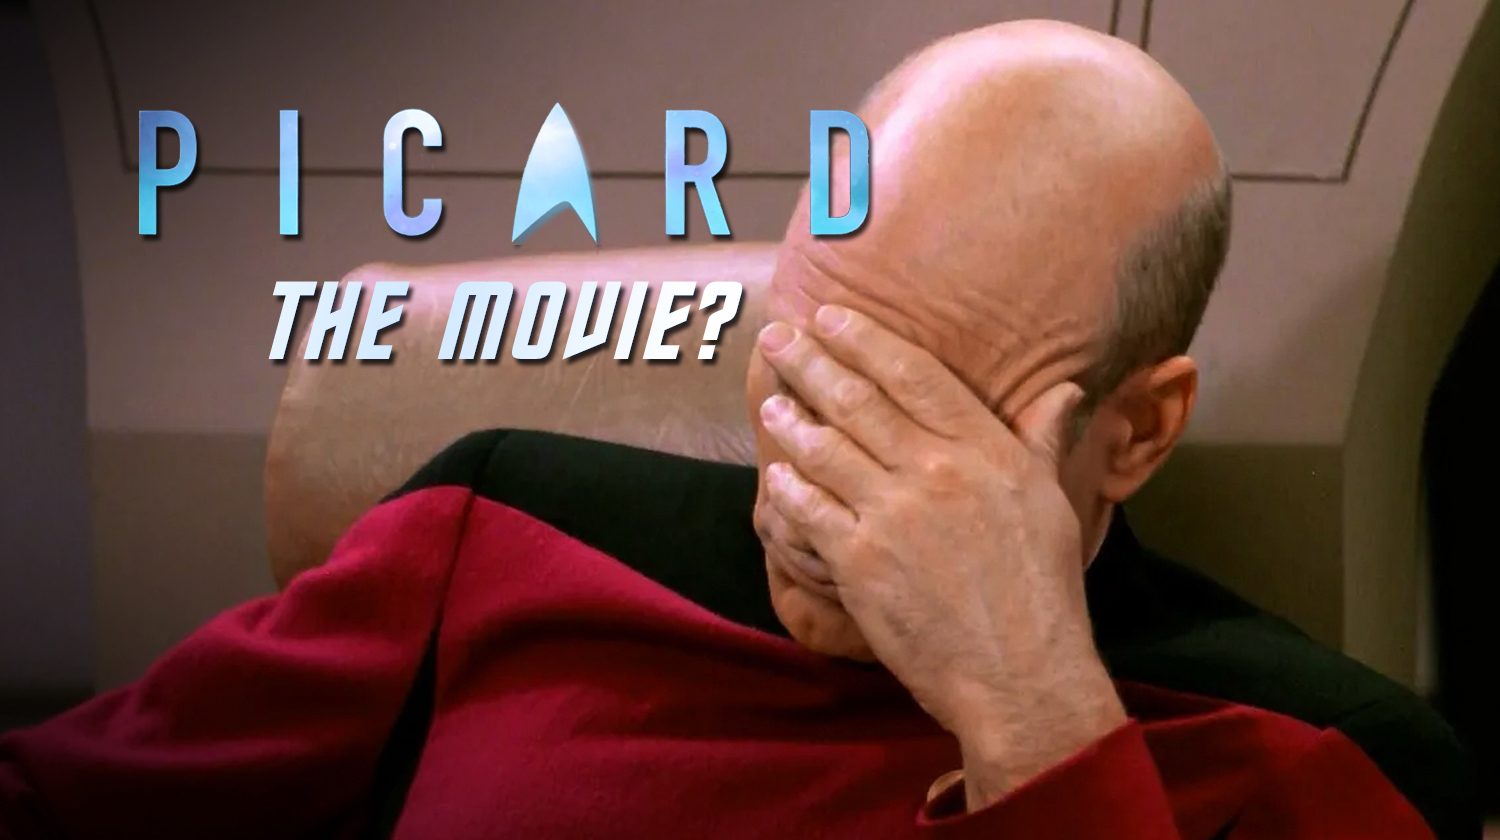 New ‘Star Trek’ movie featuring Picard is on the way, Patrick Stewart says Space